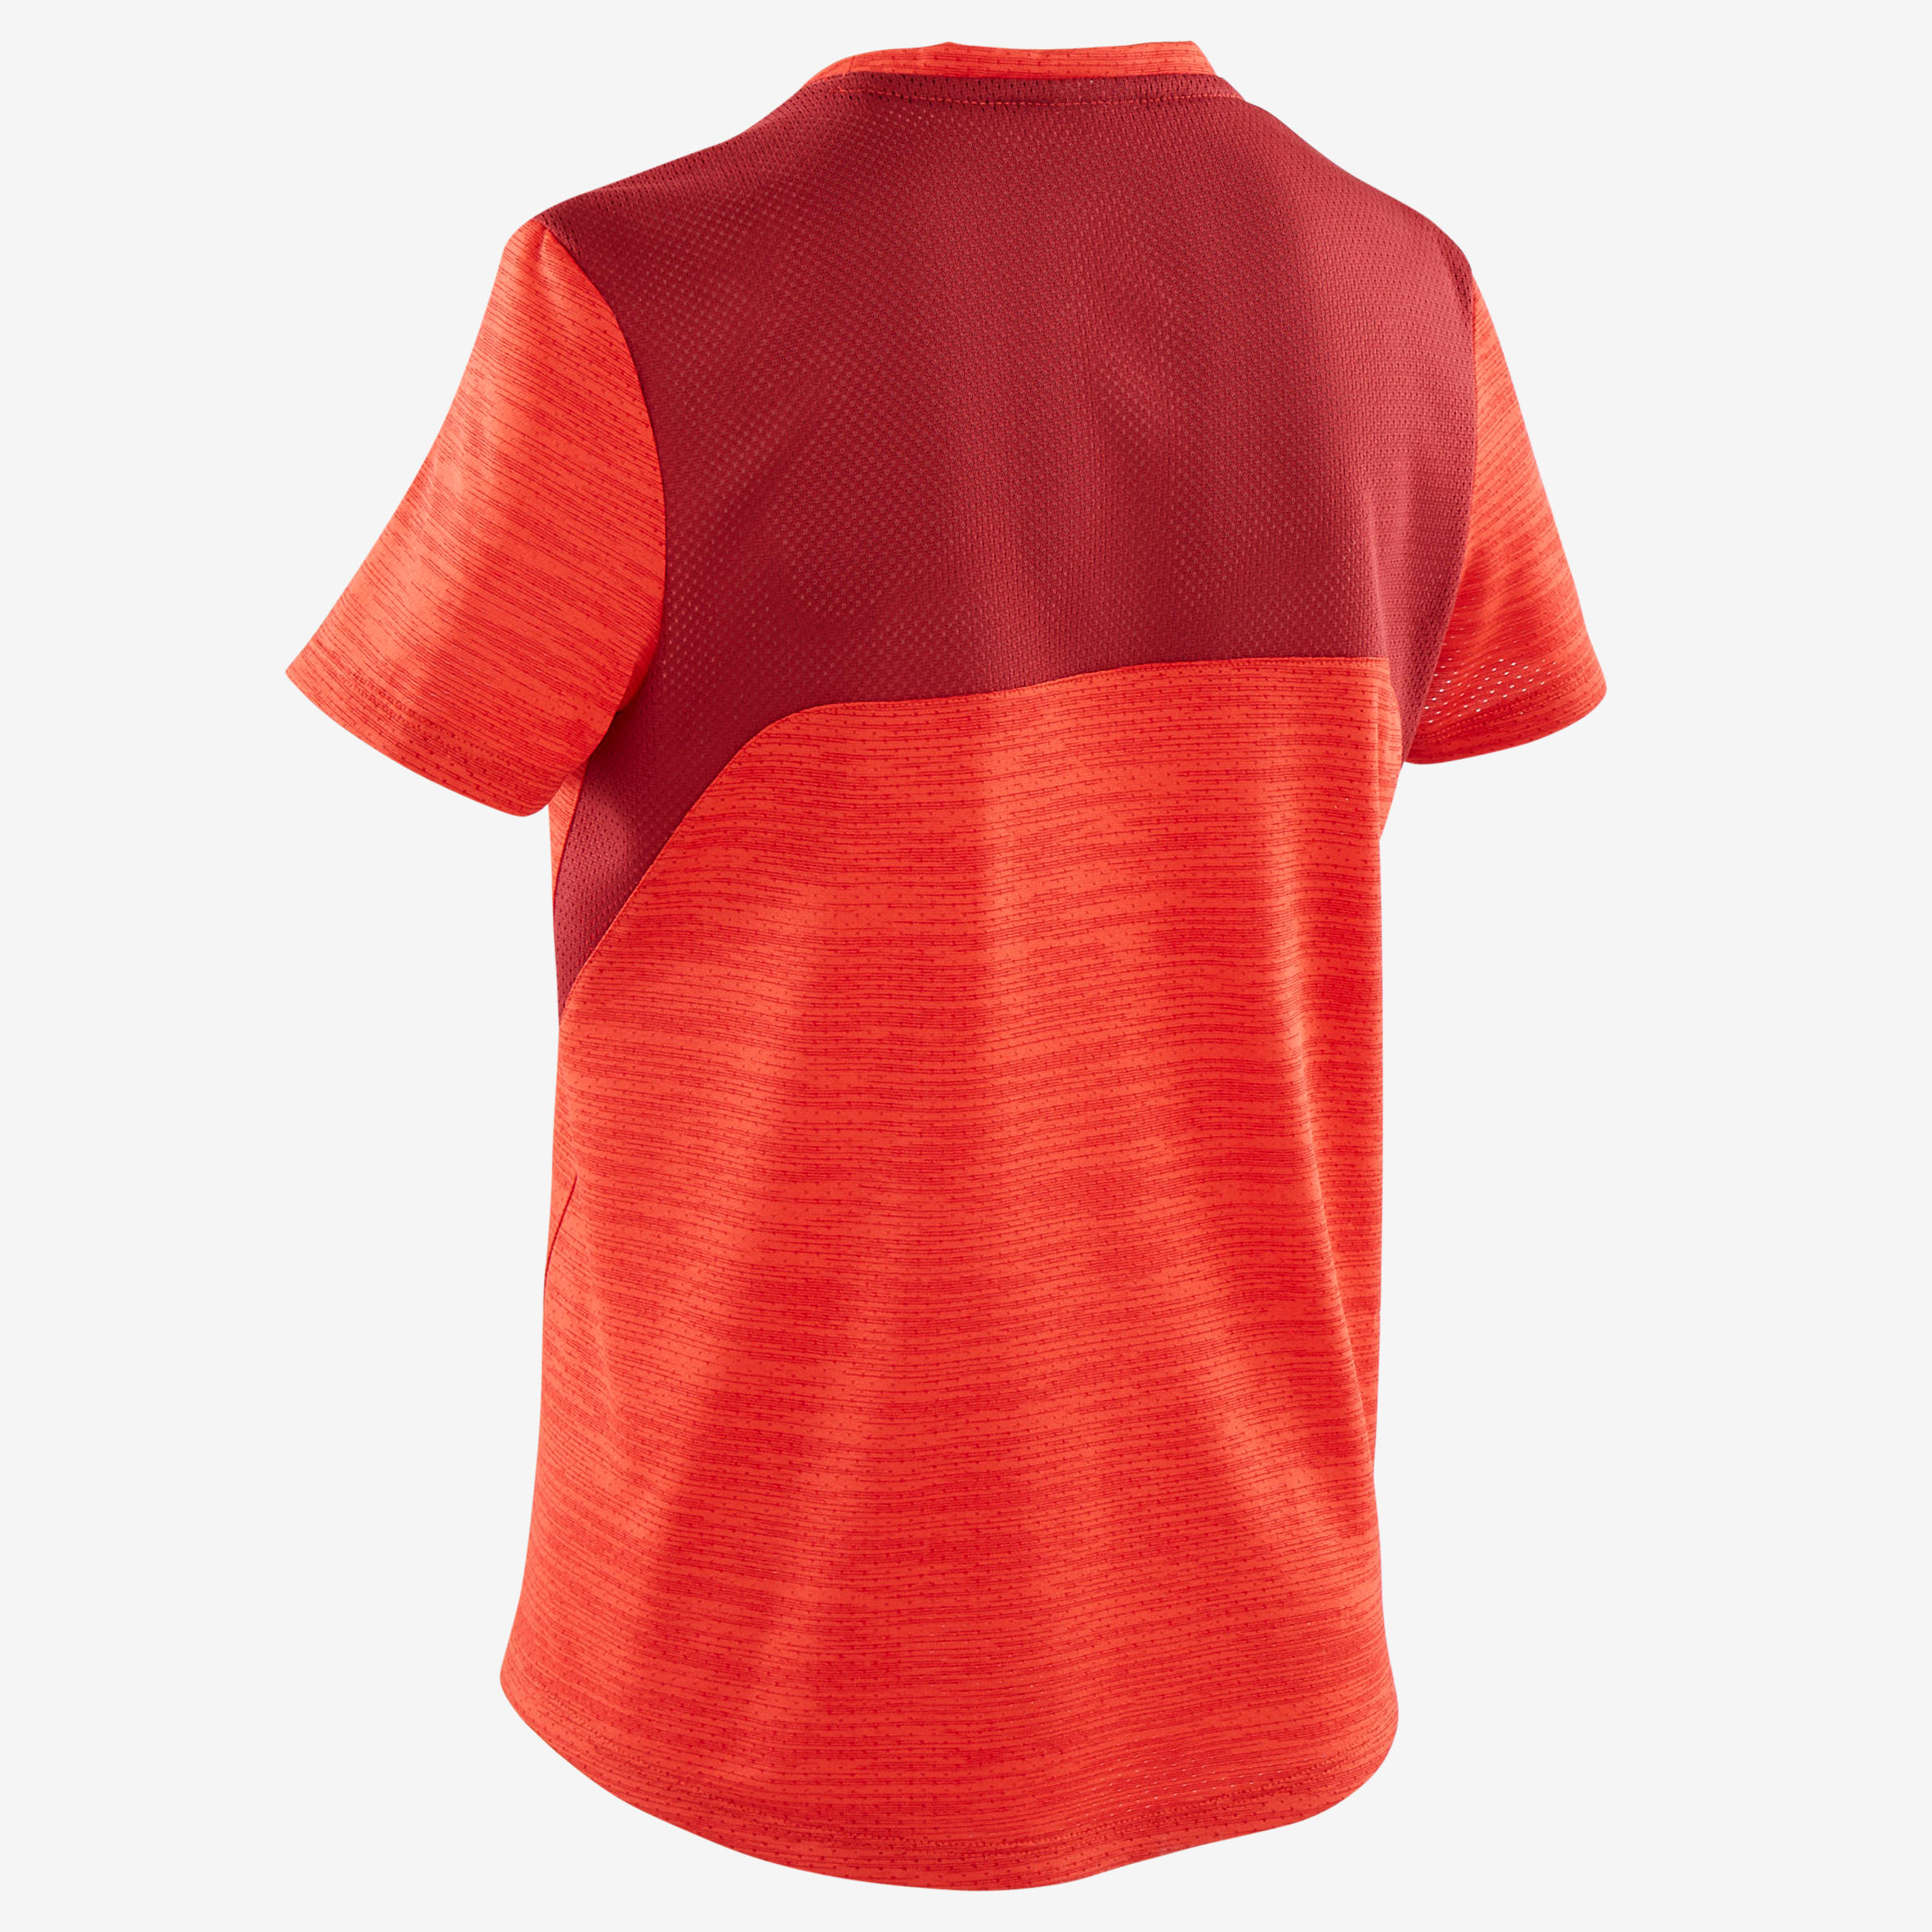 Boys' Breathable Synthetic Short-Sleeved Gym T-Shirt S500 - Red 3/5